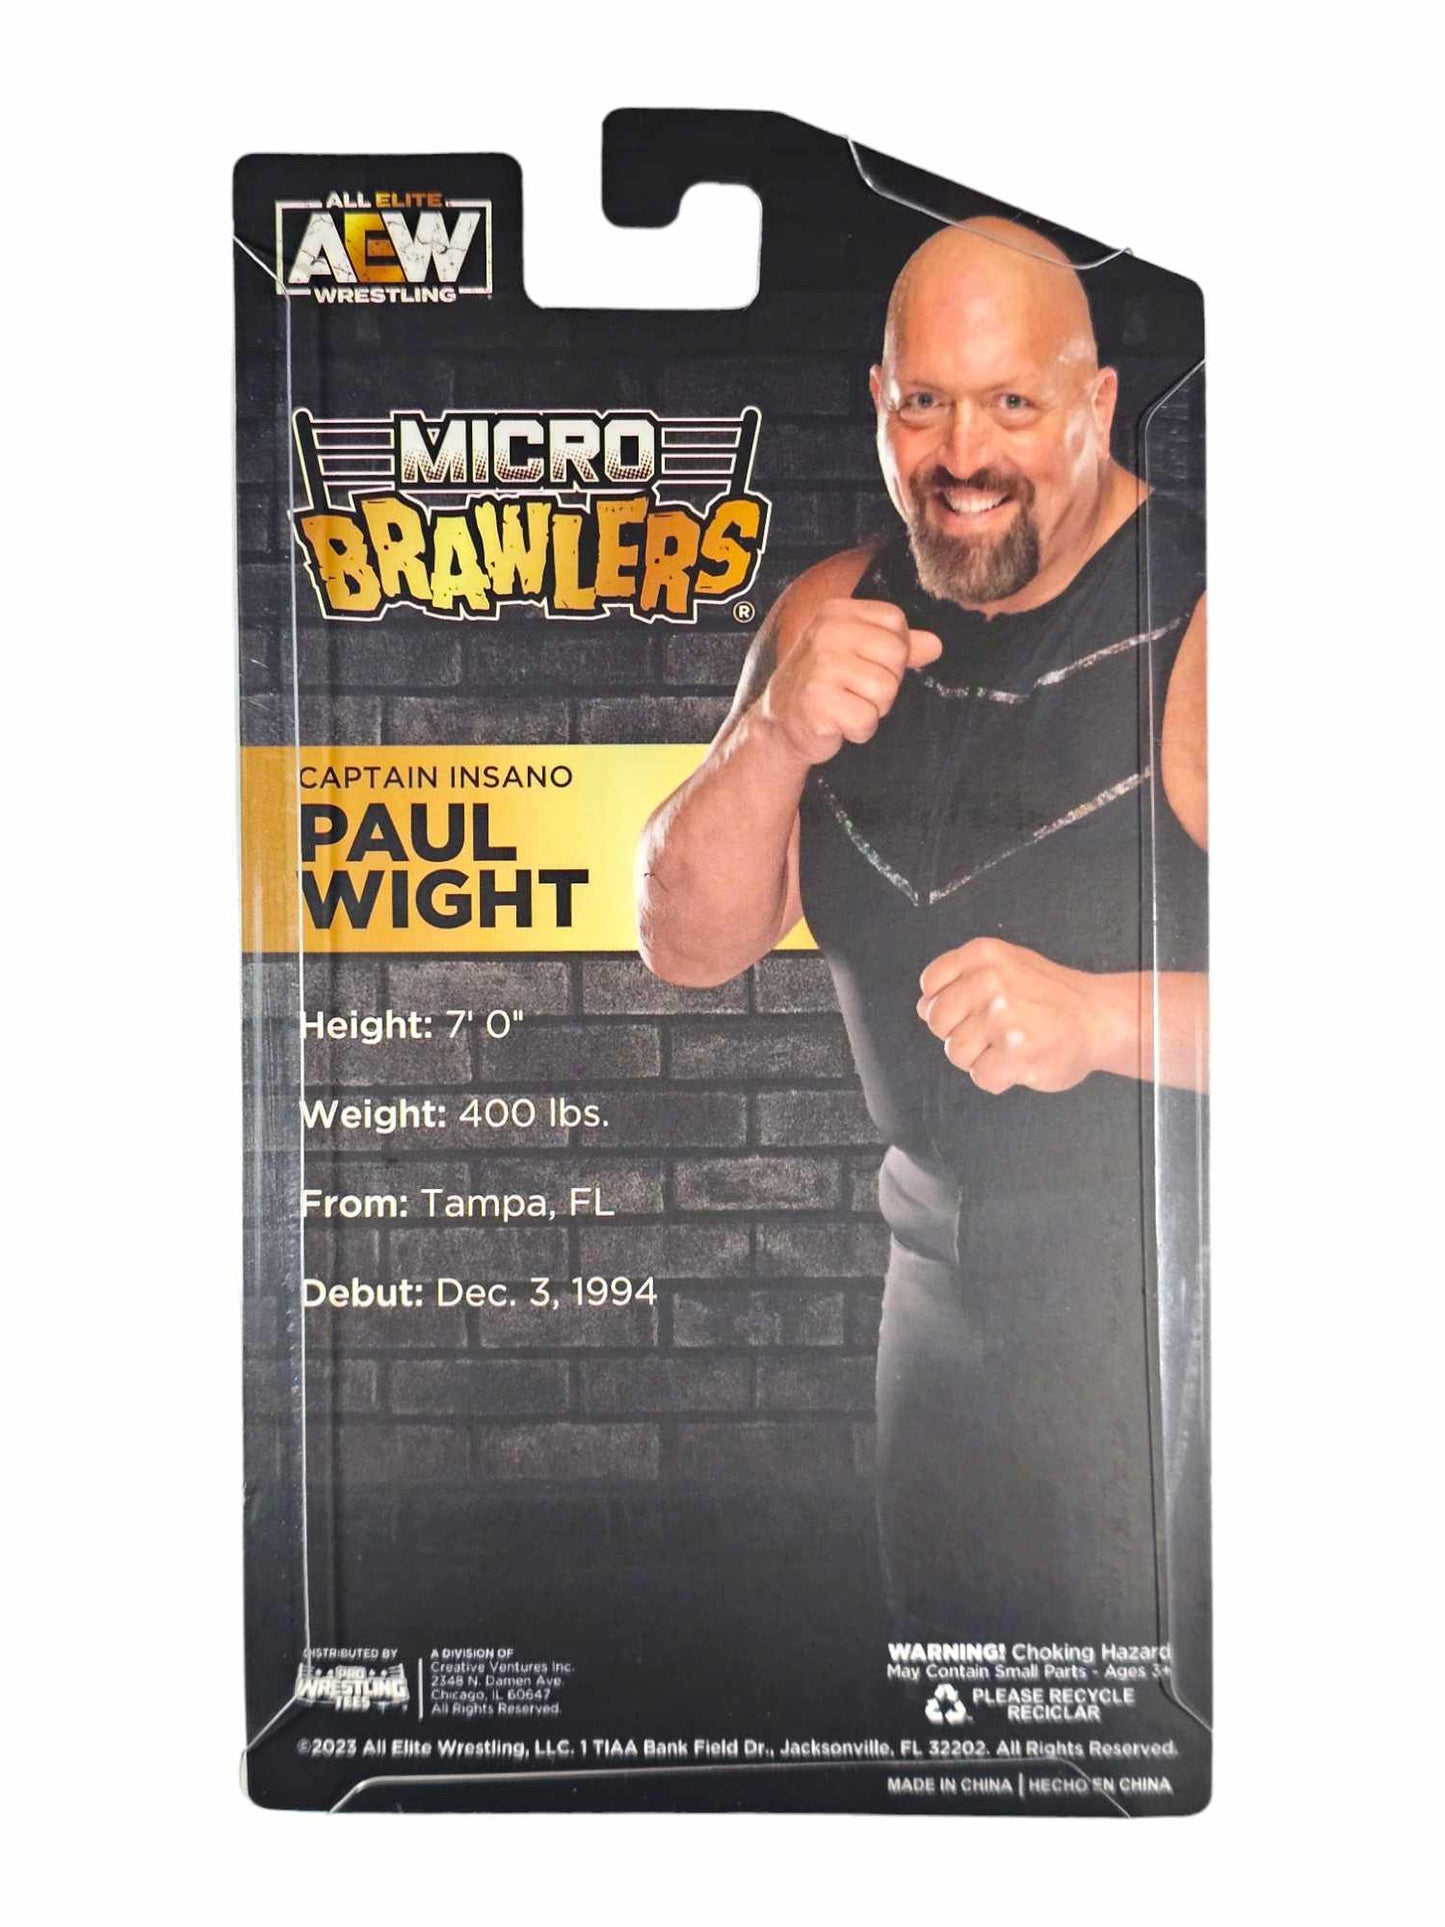 AEW MICRO BRAWLERS Captain Insano Paul Wight From The Waterboy